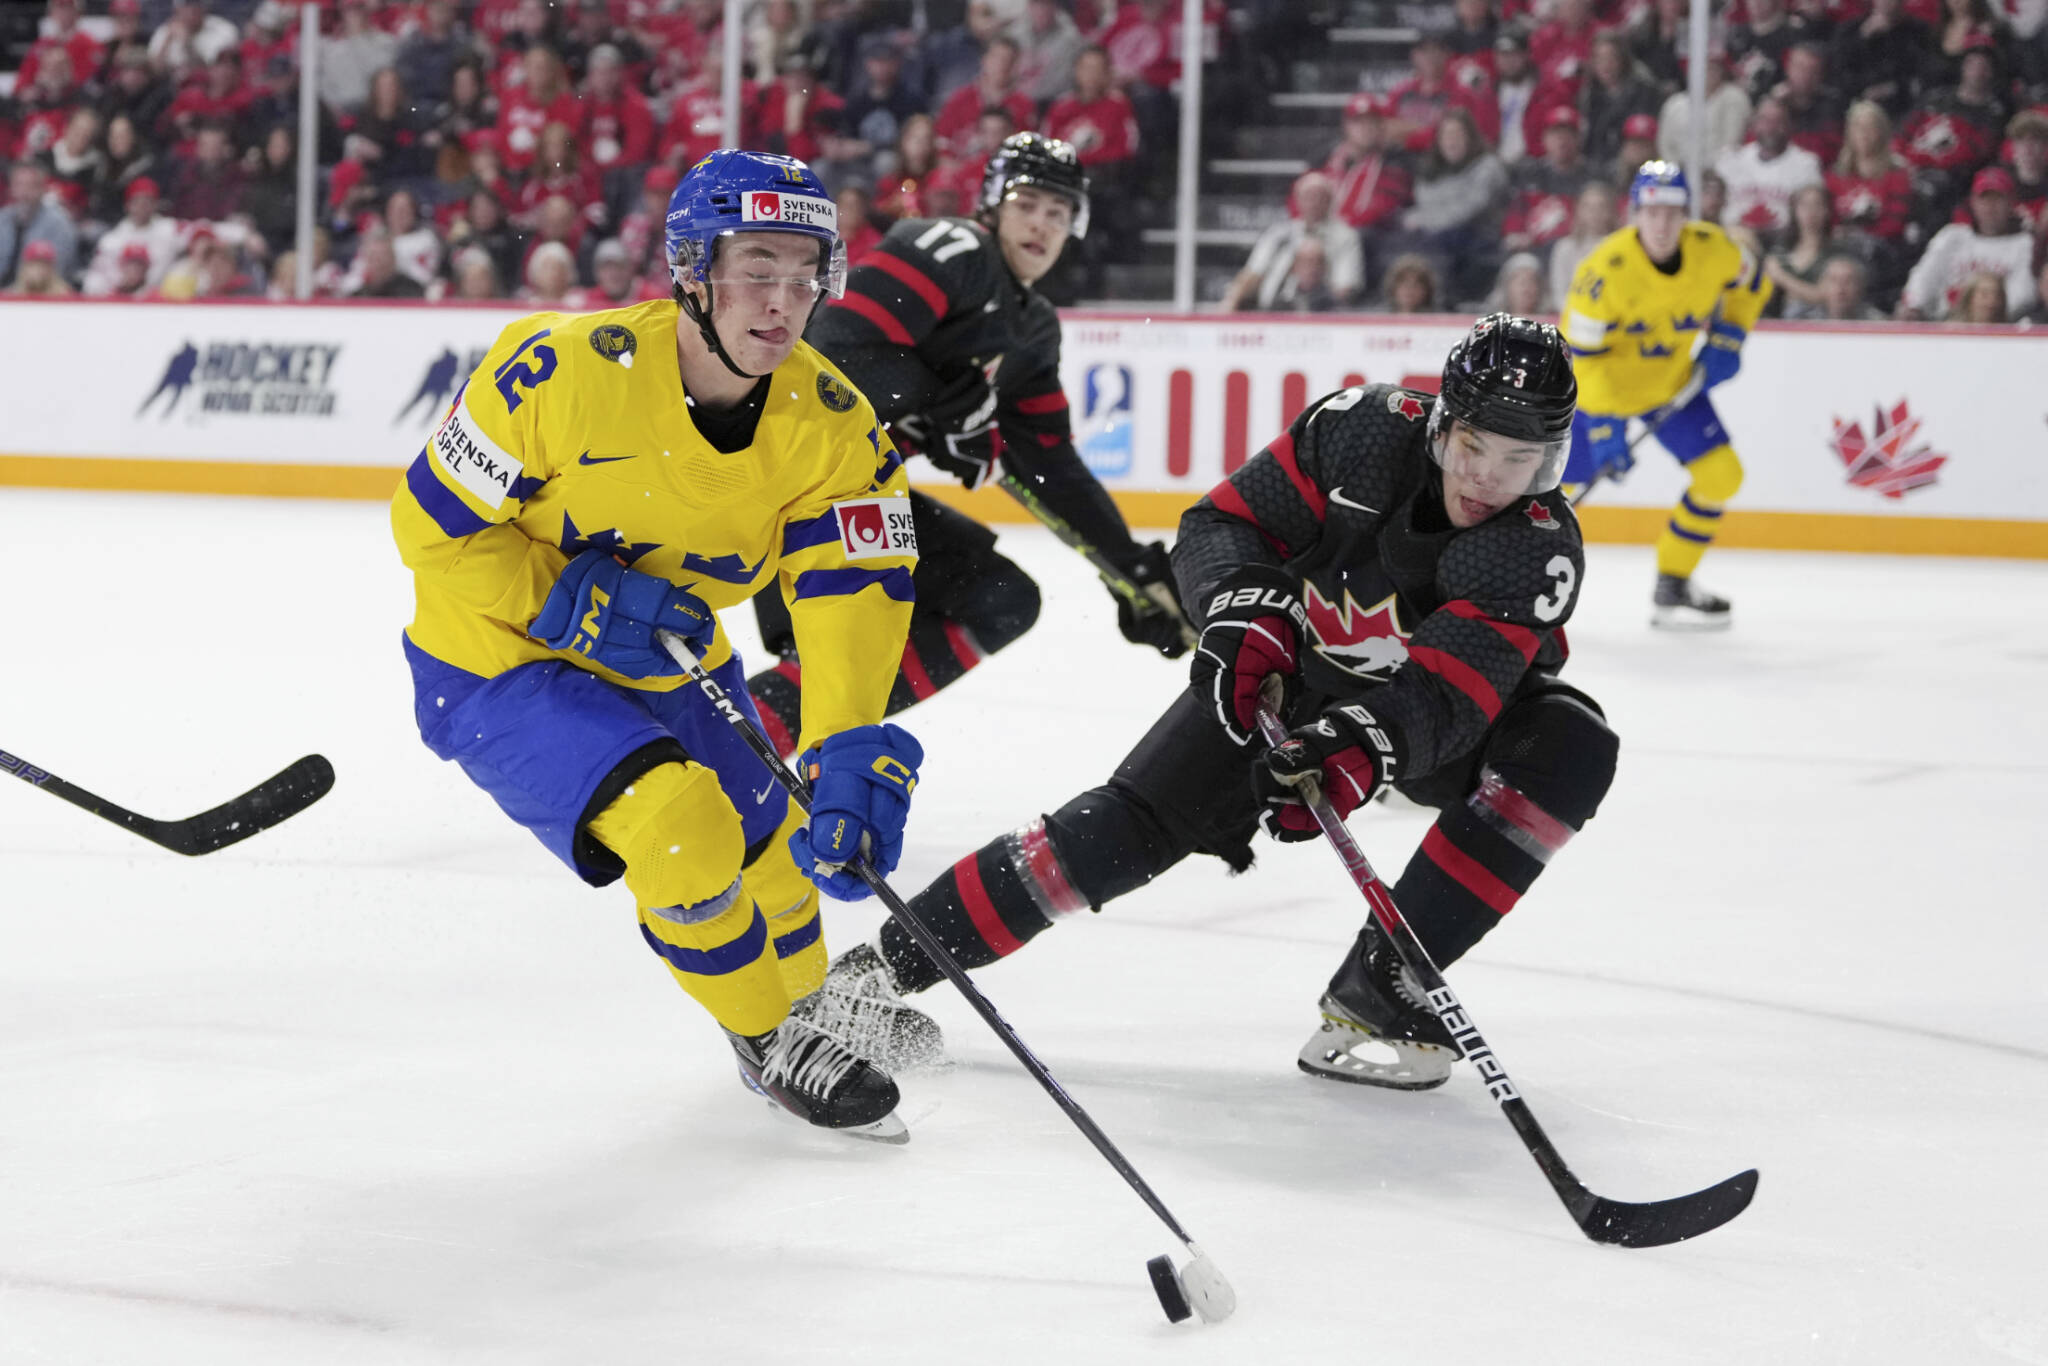 Sweden’s Noah Ostlund, left, protects the puck from Canada’s Olen Zellweger during a World Junior Hockey Championships game Dec. 31, 2022, in Halifax, Nova Scotia. Zellweger, a defenseman for the Everett Silvertips, helped Canada win the tournament. (Darren Calabrese/The Canadian Press via AP)